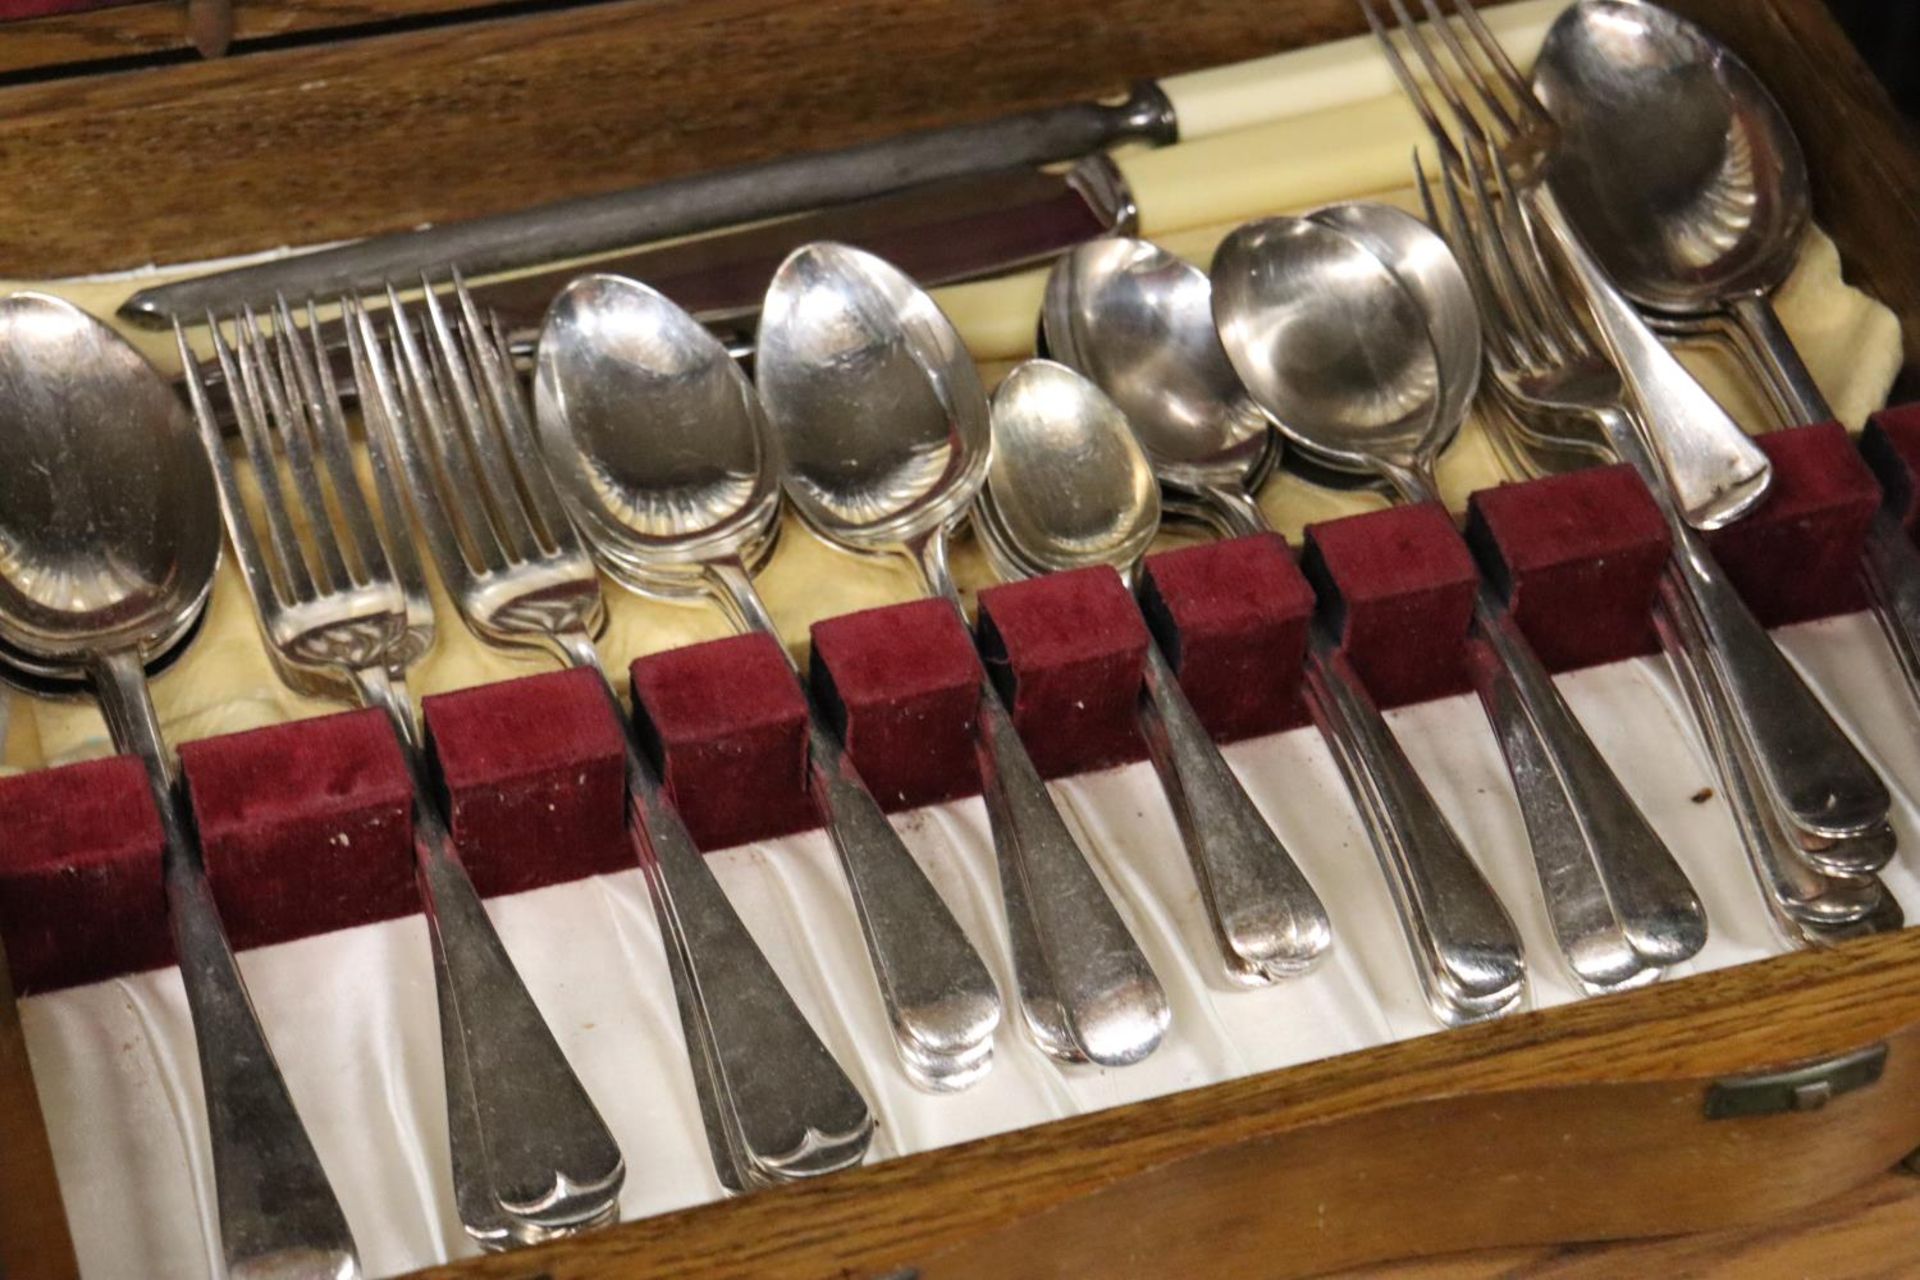 A PRIESTLEY AND MOORE, SHEFFIELD VINTAGE CANTEEN OF CUTLERY IN AN OAK ART DECO STYLE CASE - Image 3 of 3